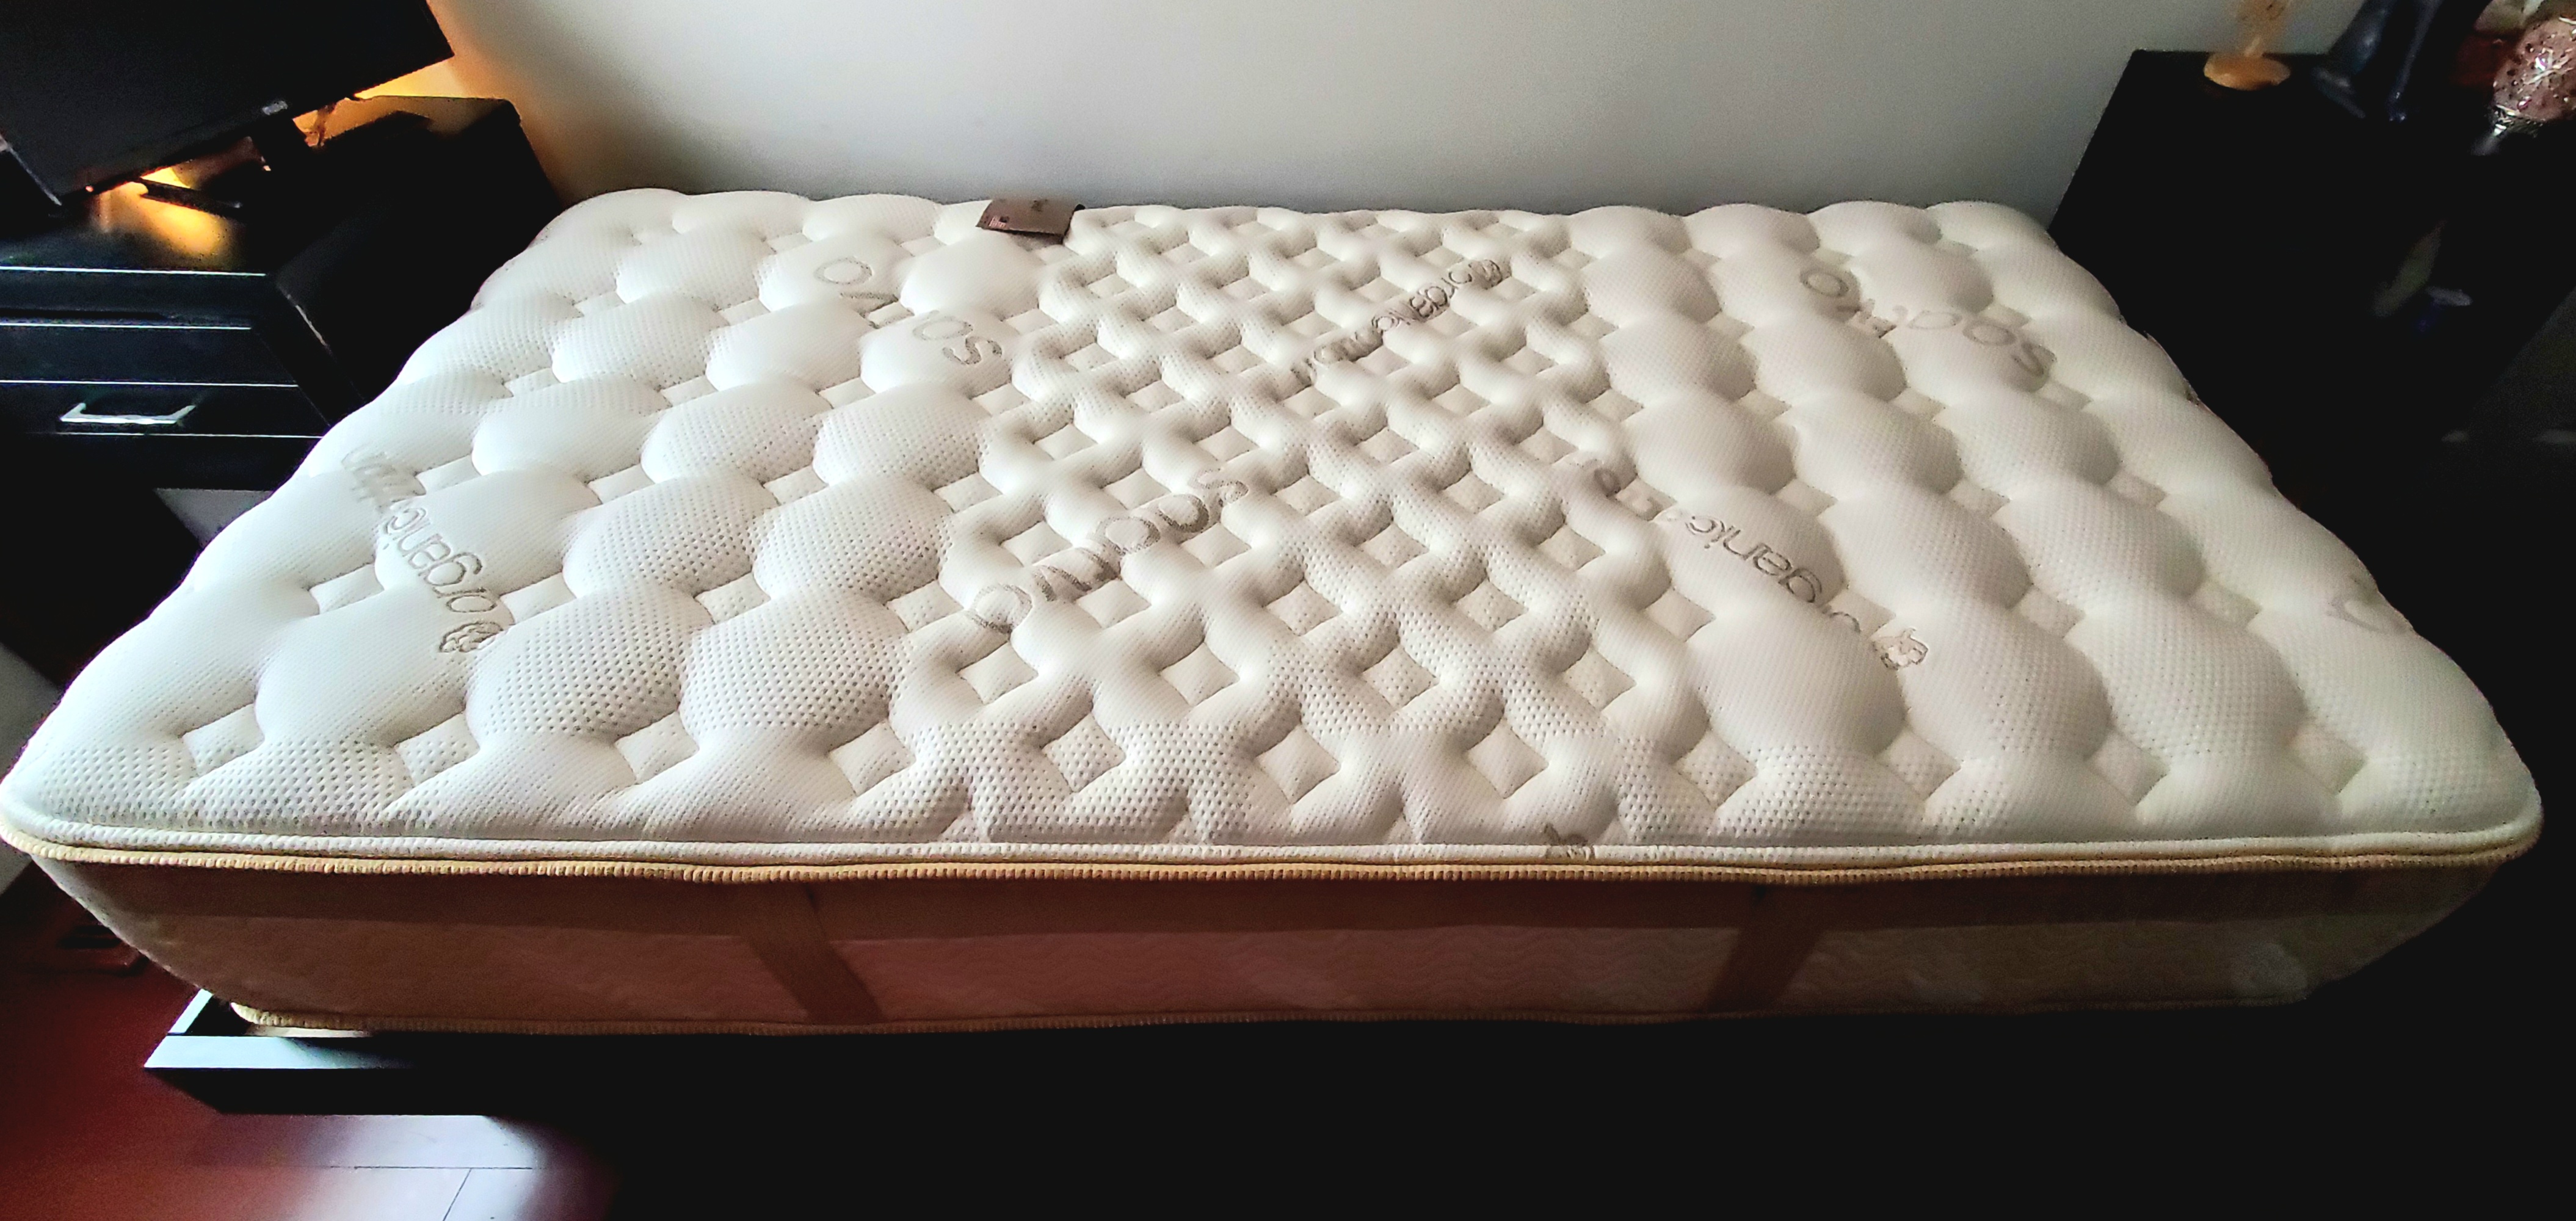 Loom & Leaf mattress review, mattress on bed without sheets